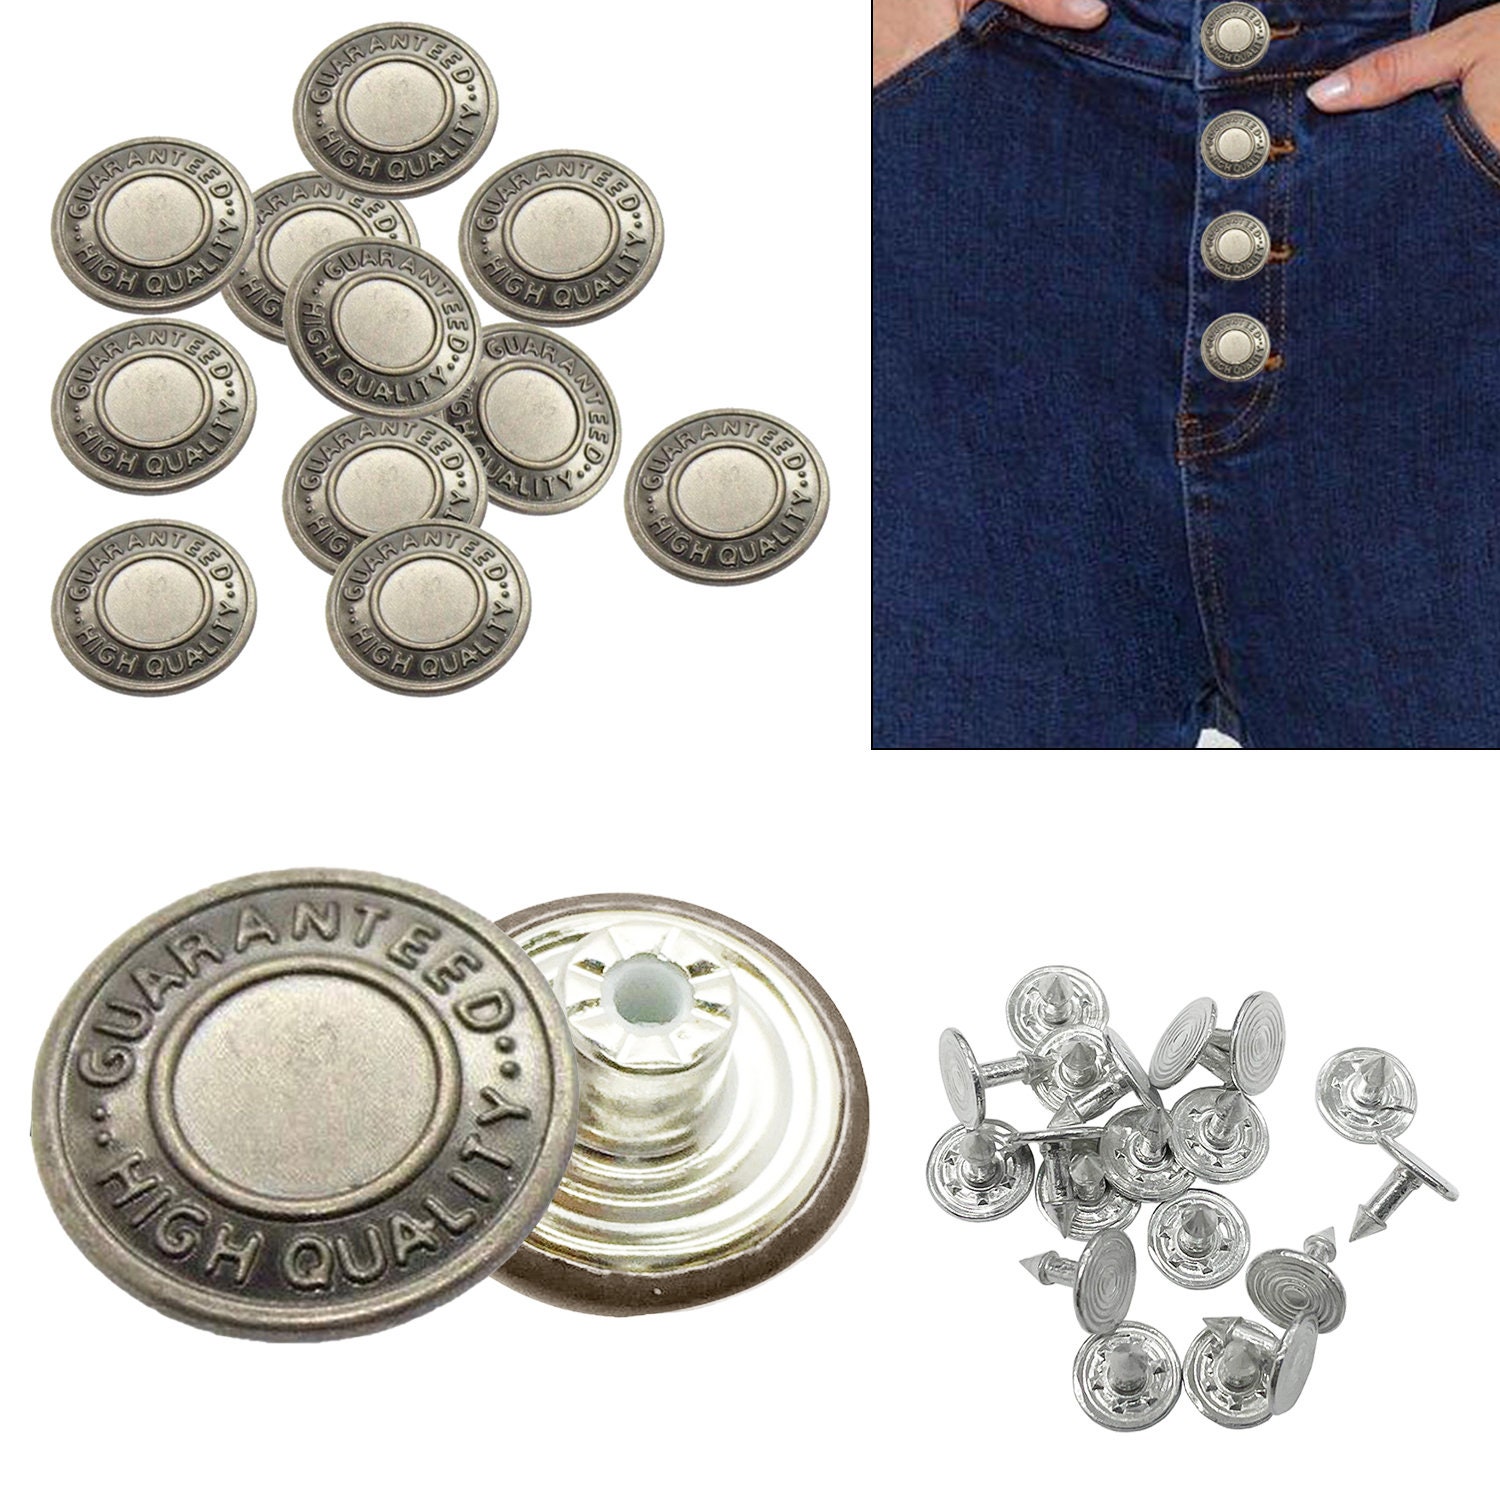 2 Pairs of Cartoon Pants Buttons Adjustable Dress Tightening Buttons Jeans  Buttons